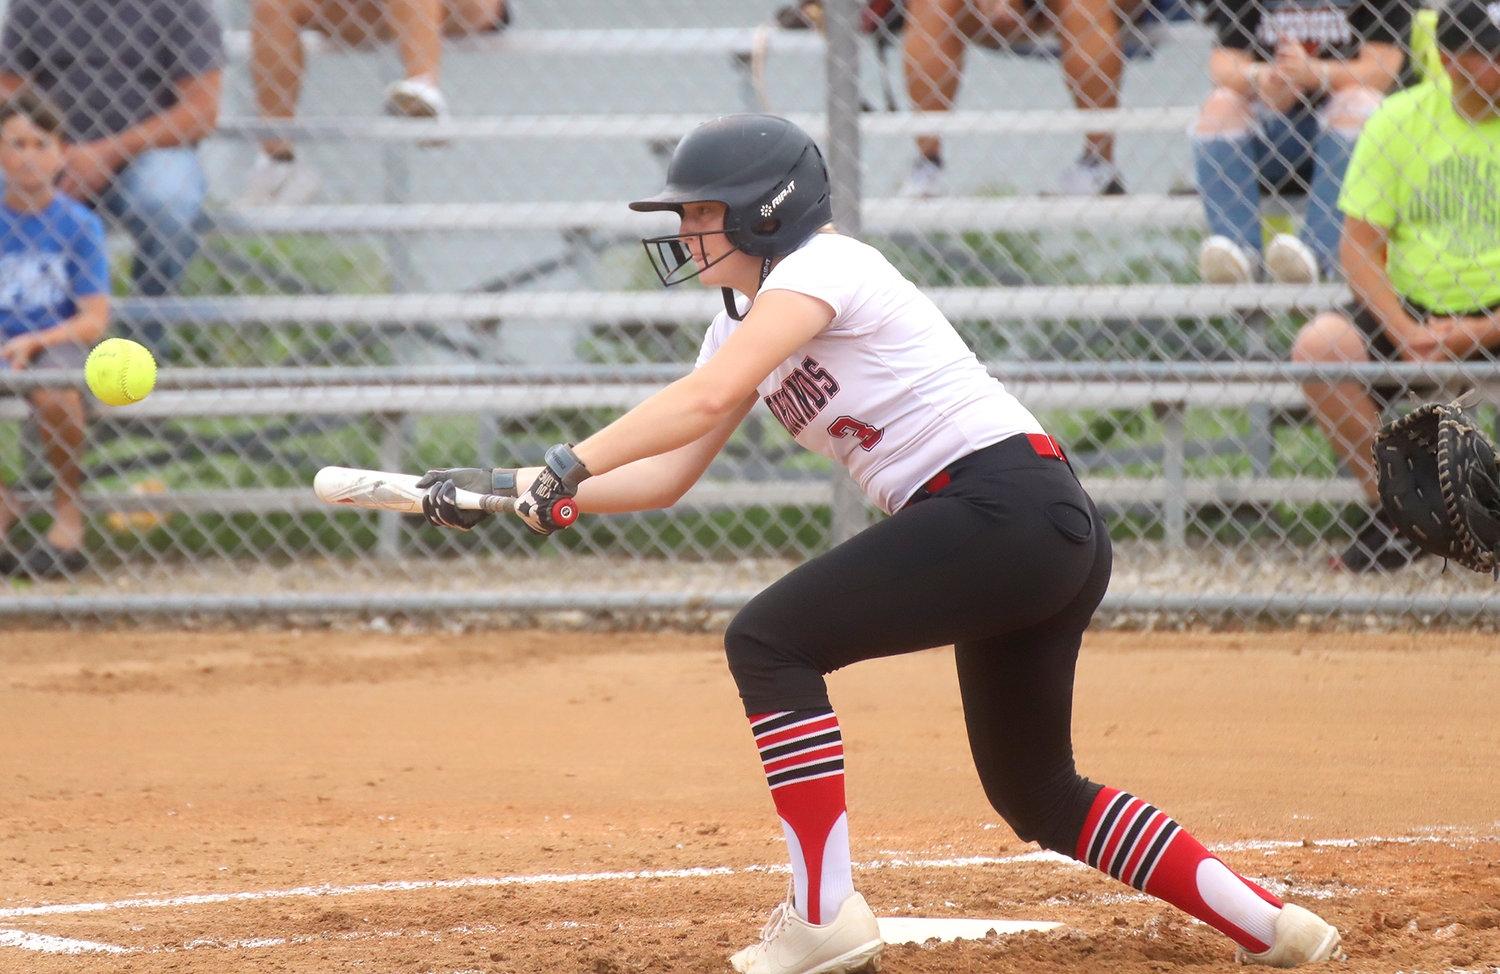 Elle Ruble lays down a sacrifice bunt in the bottom of the second inning in Fort Madison's 5-0 win over Keokuk in Class 4A Region 7 quarterfinals Friday in Fort Madison.